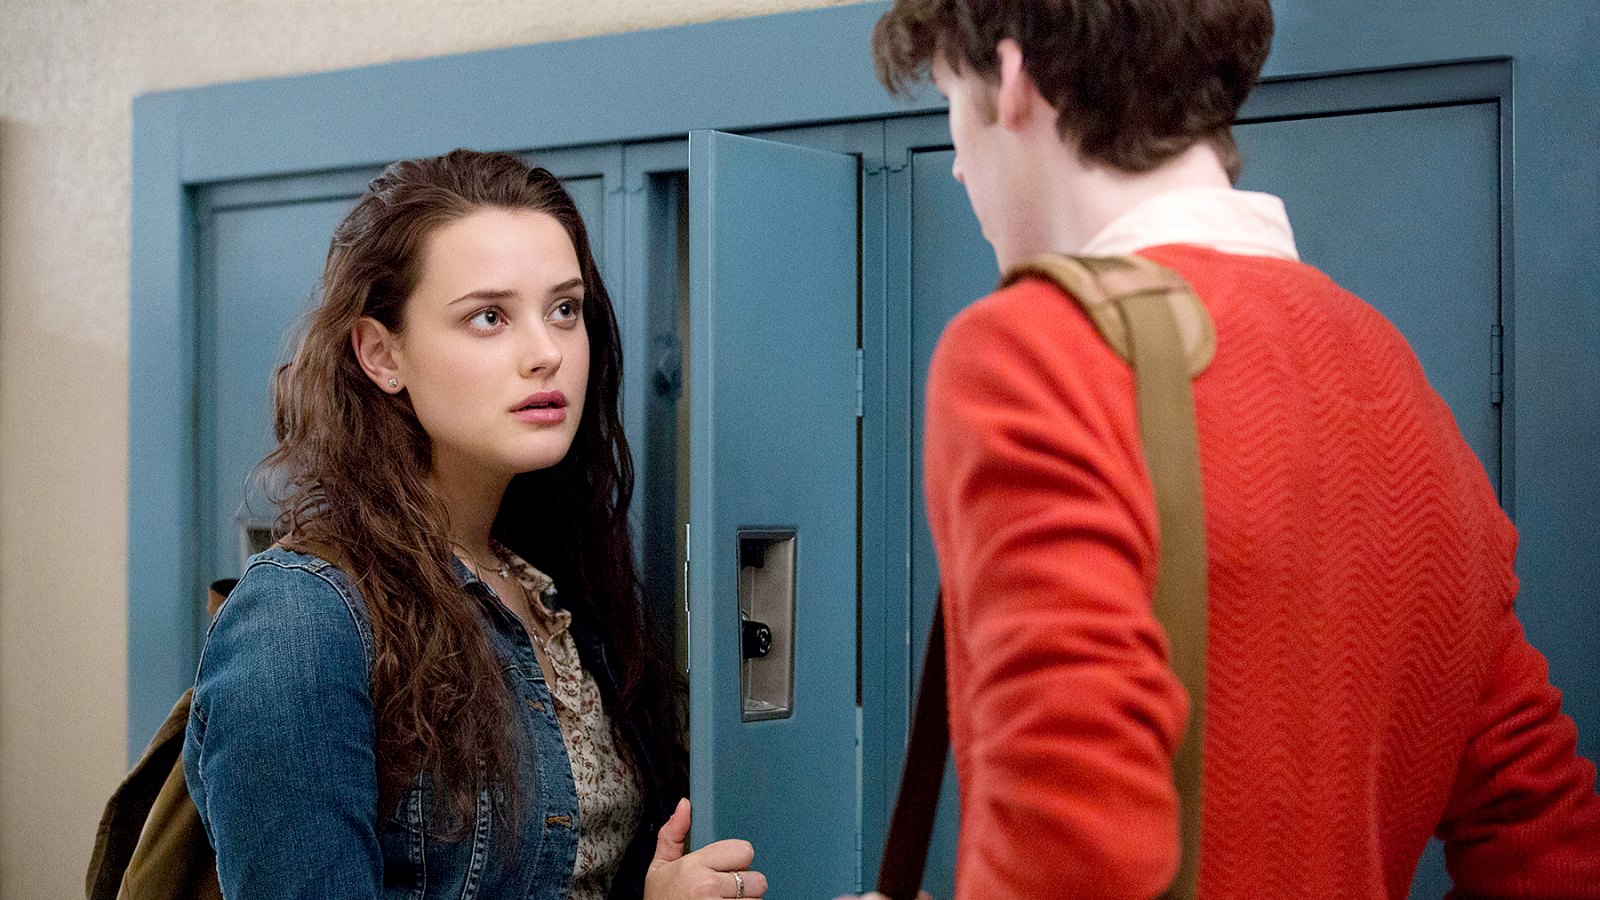 Katherine Langford and Devin Druid on 13 Reasons Why